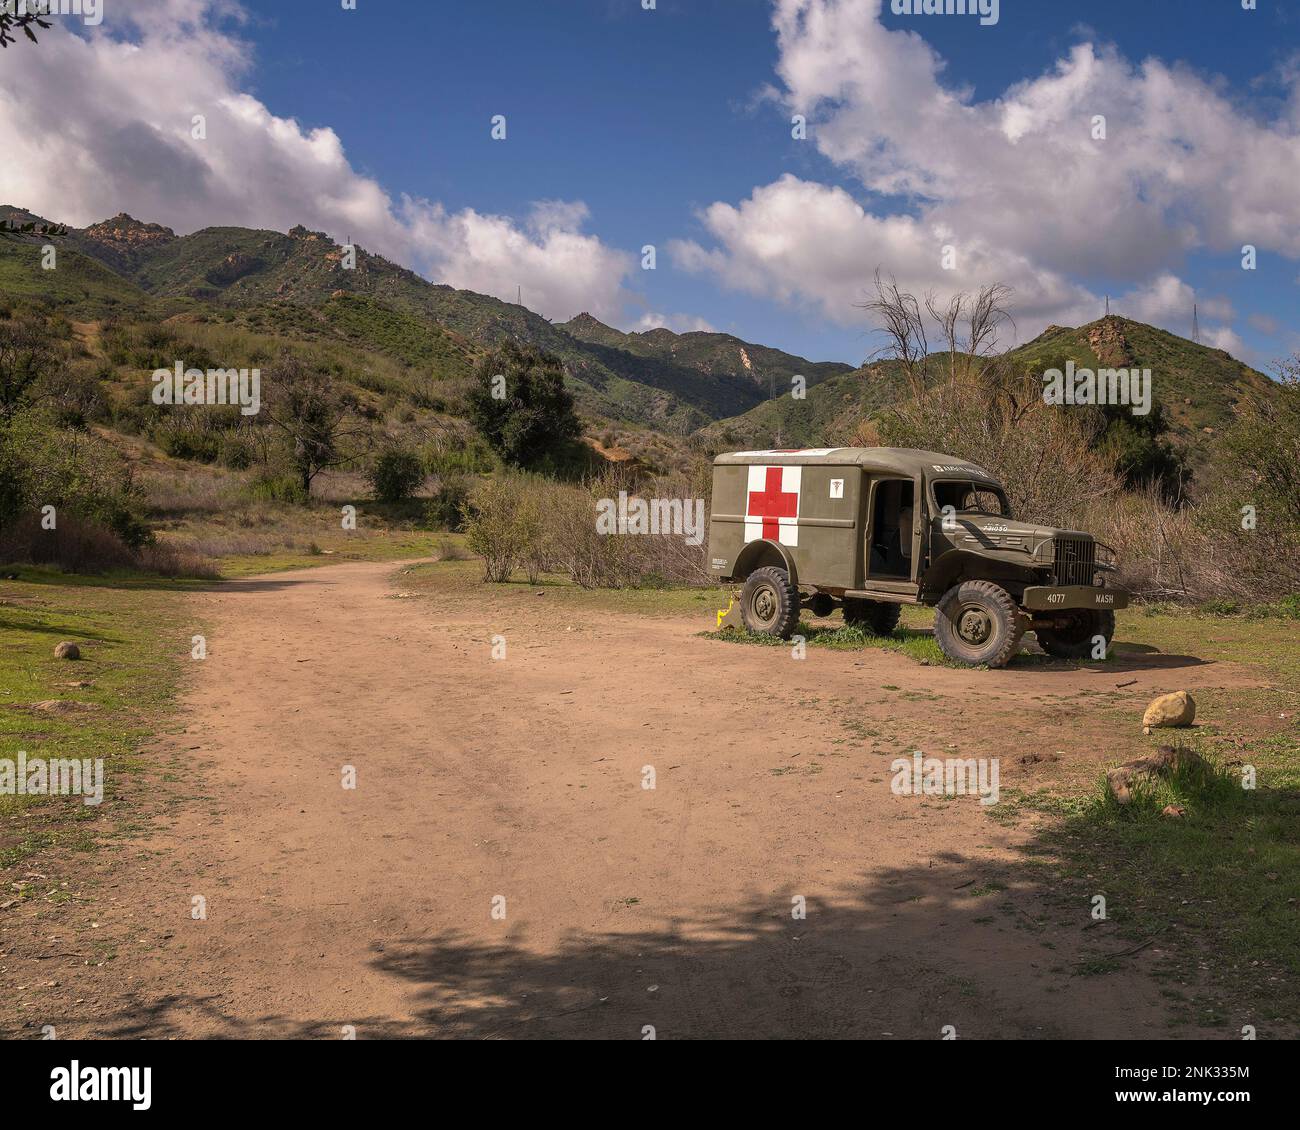 February 22, 2023, Calabasas, CA, USA: An old Army ambulance, used on the tv show MASH, lies abandoned on the old set at Malibu Creek State Park in Ca Stock Photo